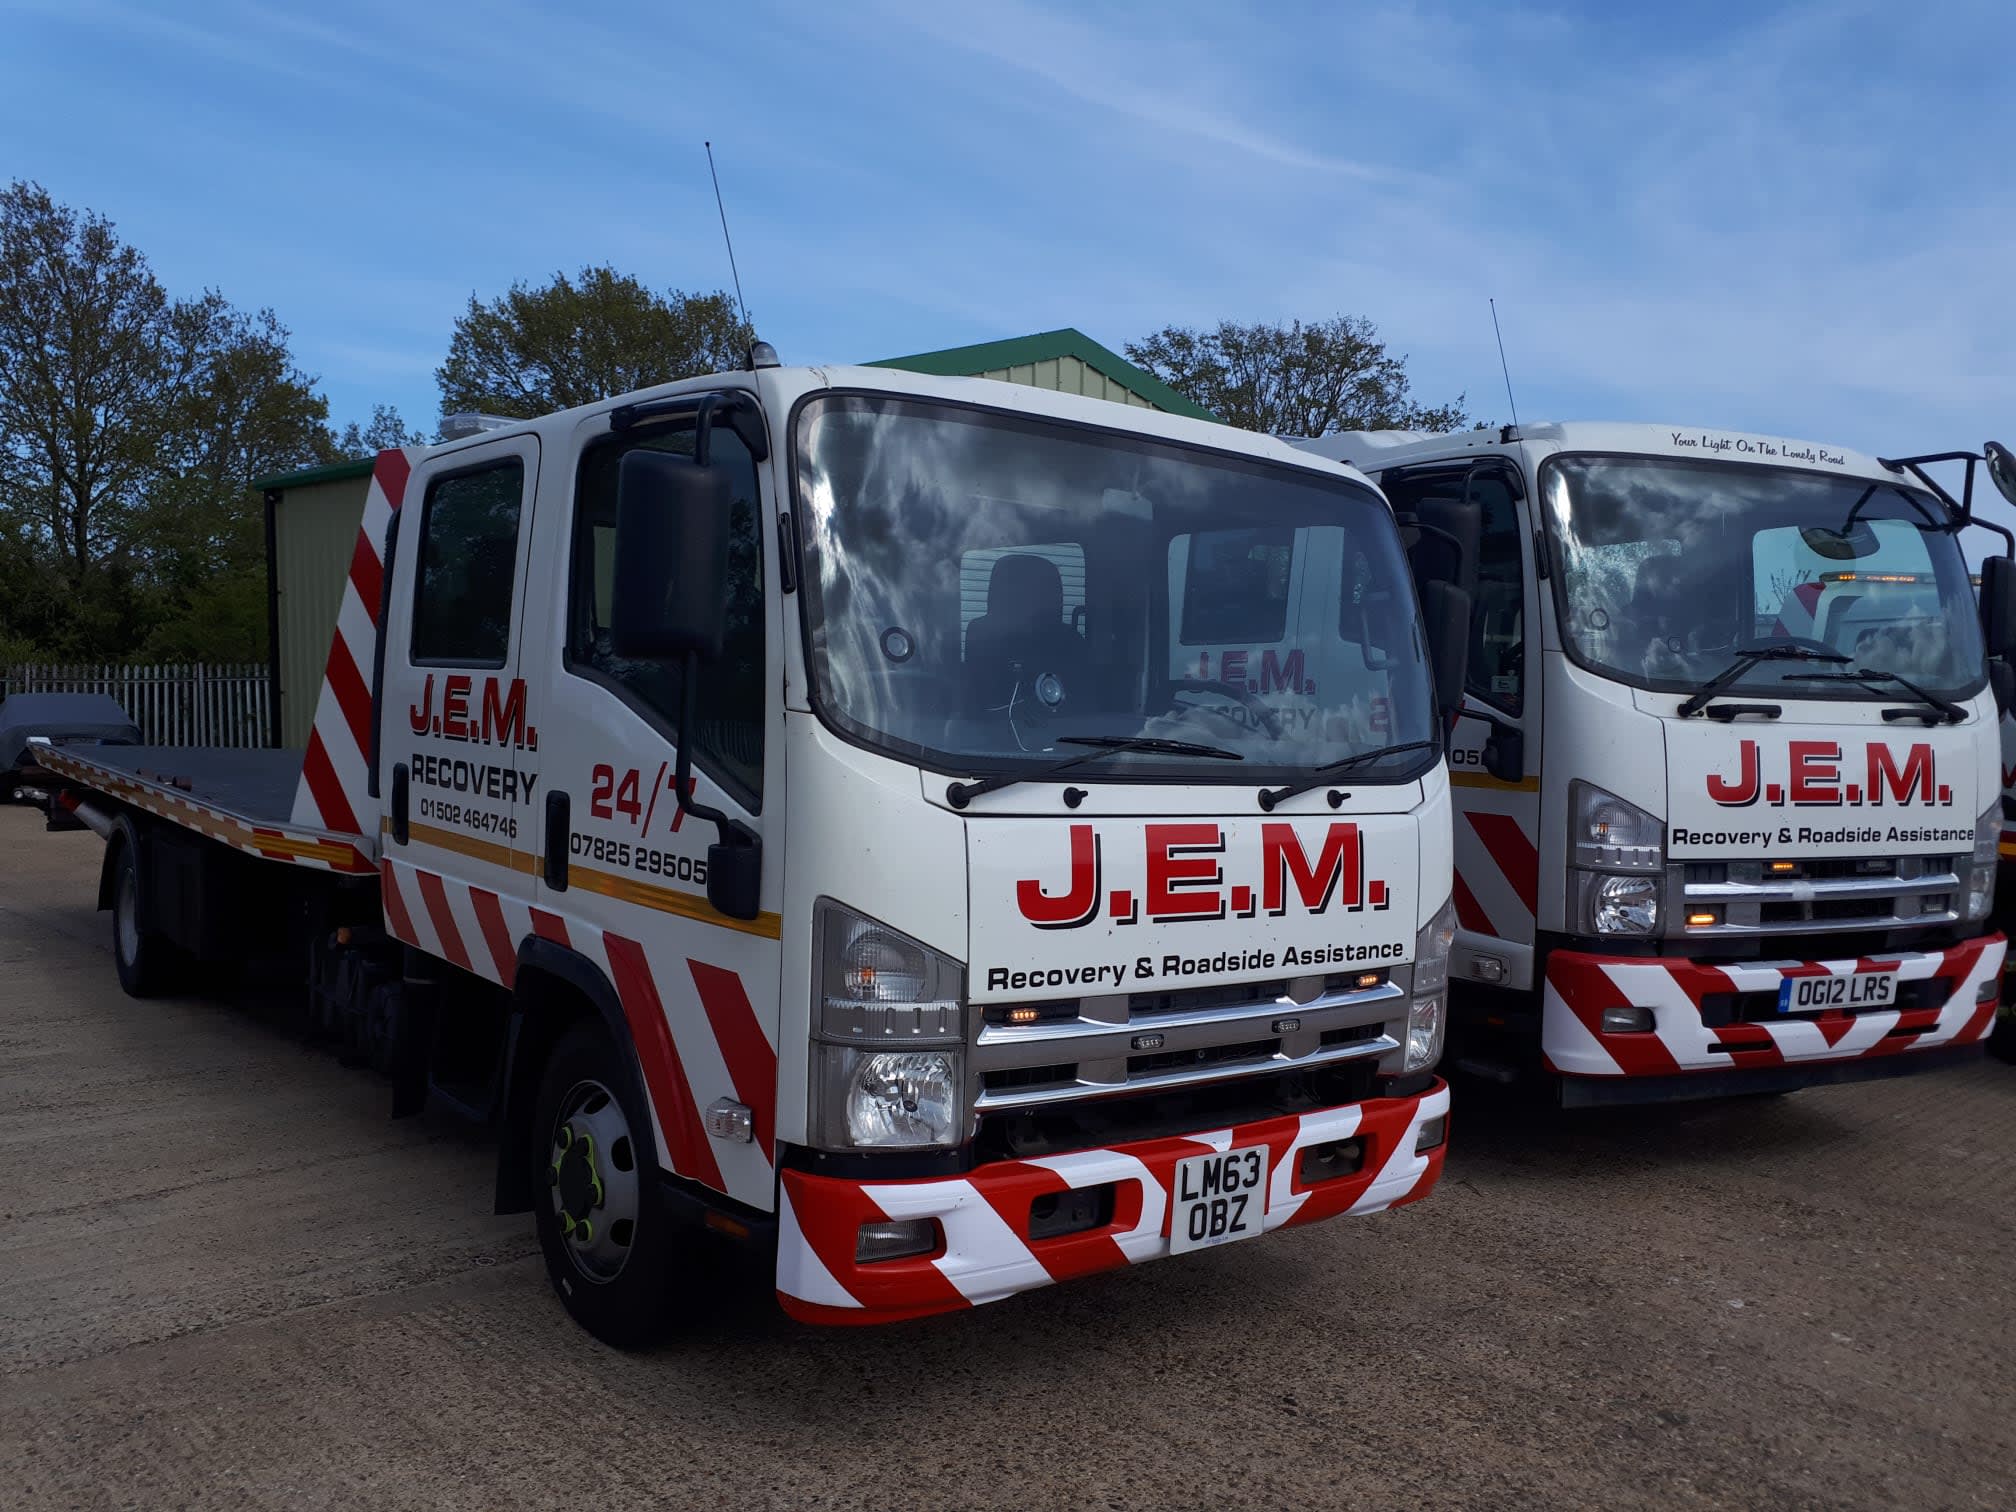 Jem Recovery Beccles 01502 464746